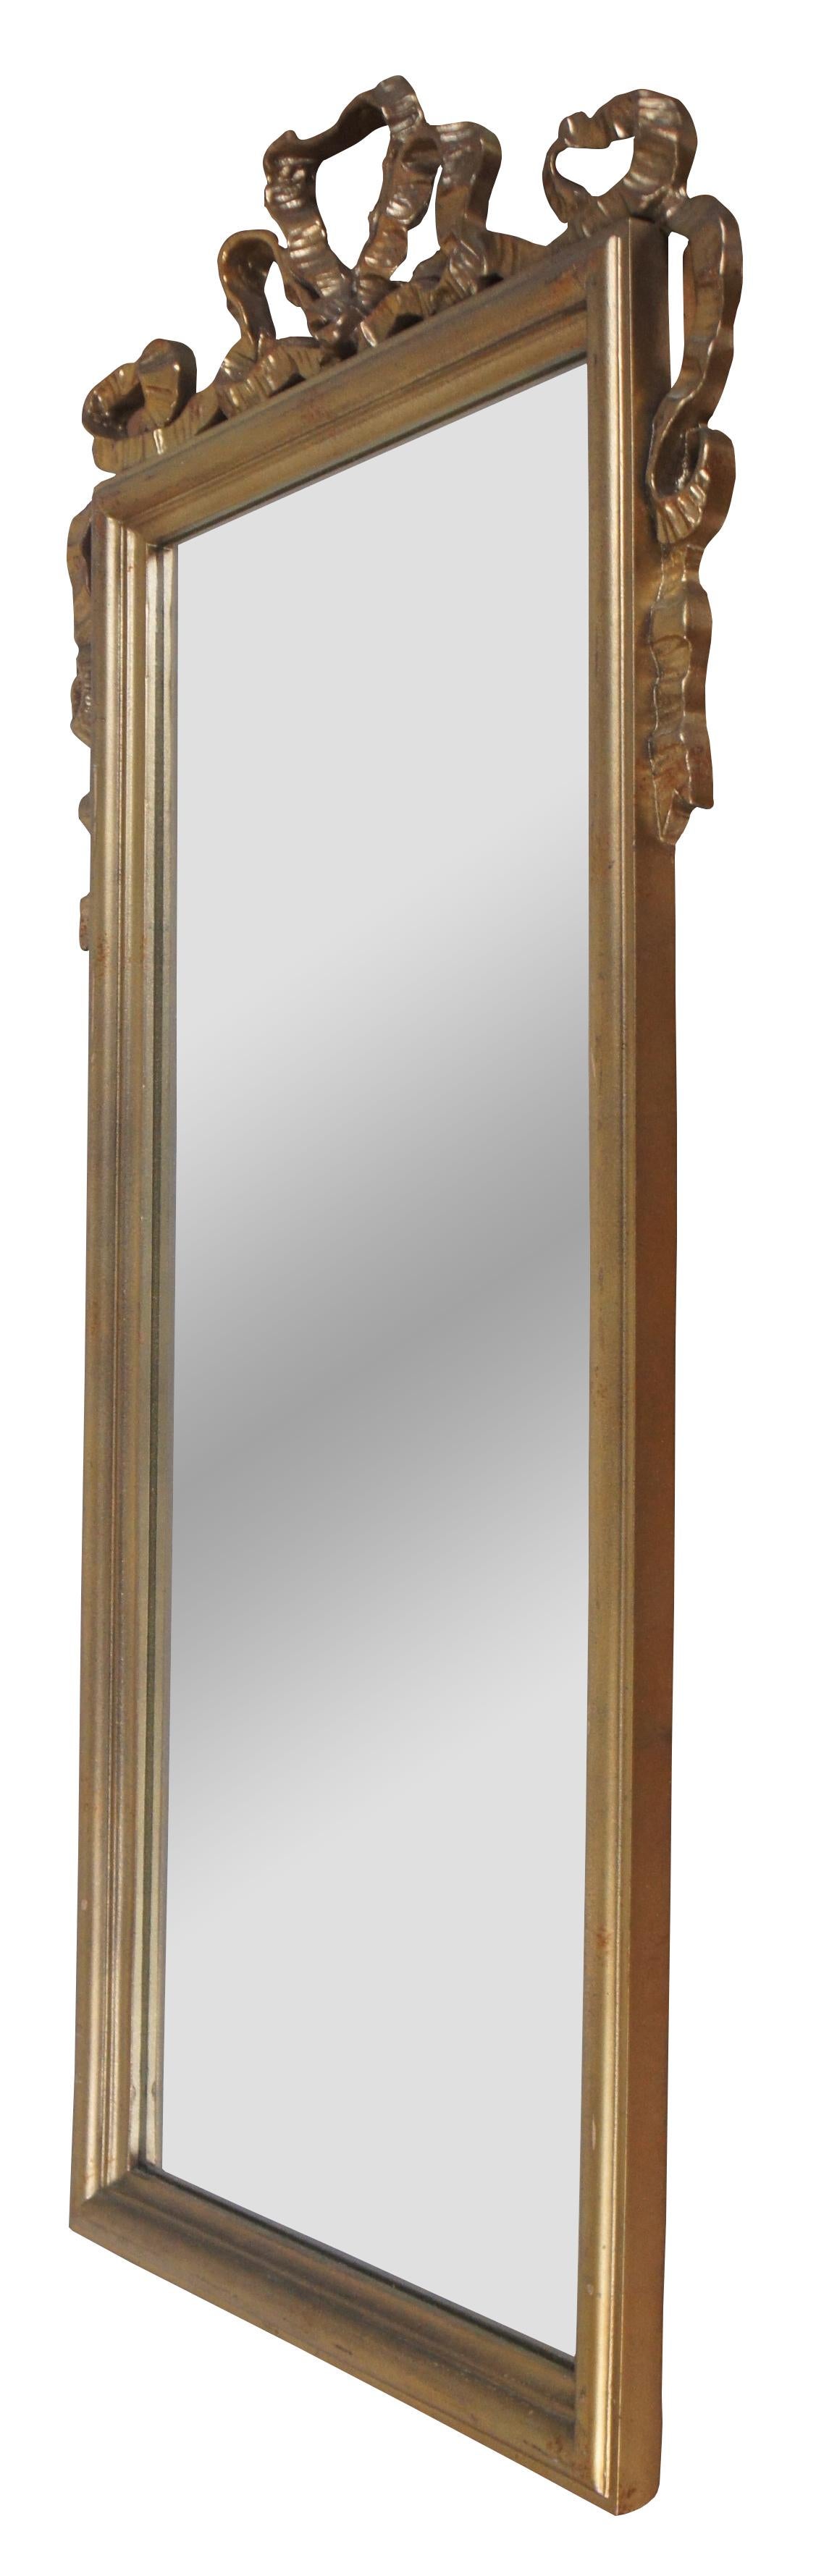 Napoleon III Vintage French Neoclassical Beveled Gold Gilt Ribbon Wall Hall Vanity Mirror